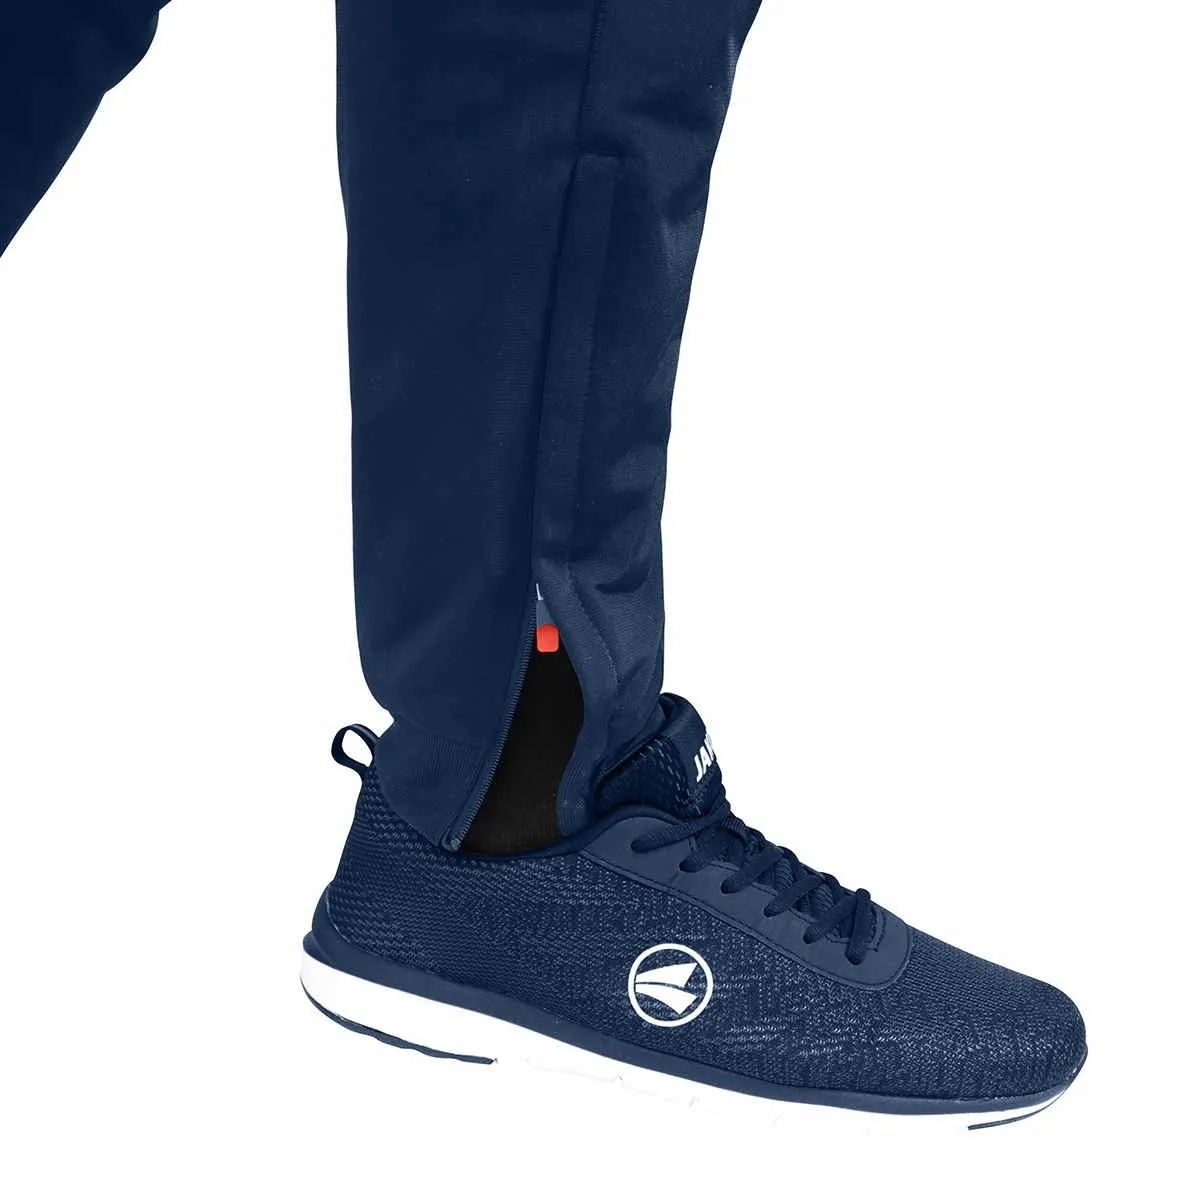 Polyesterhose Competition 2.0 navy/flame Beinabschluss